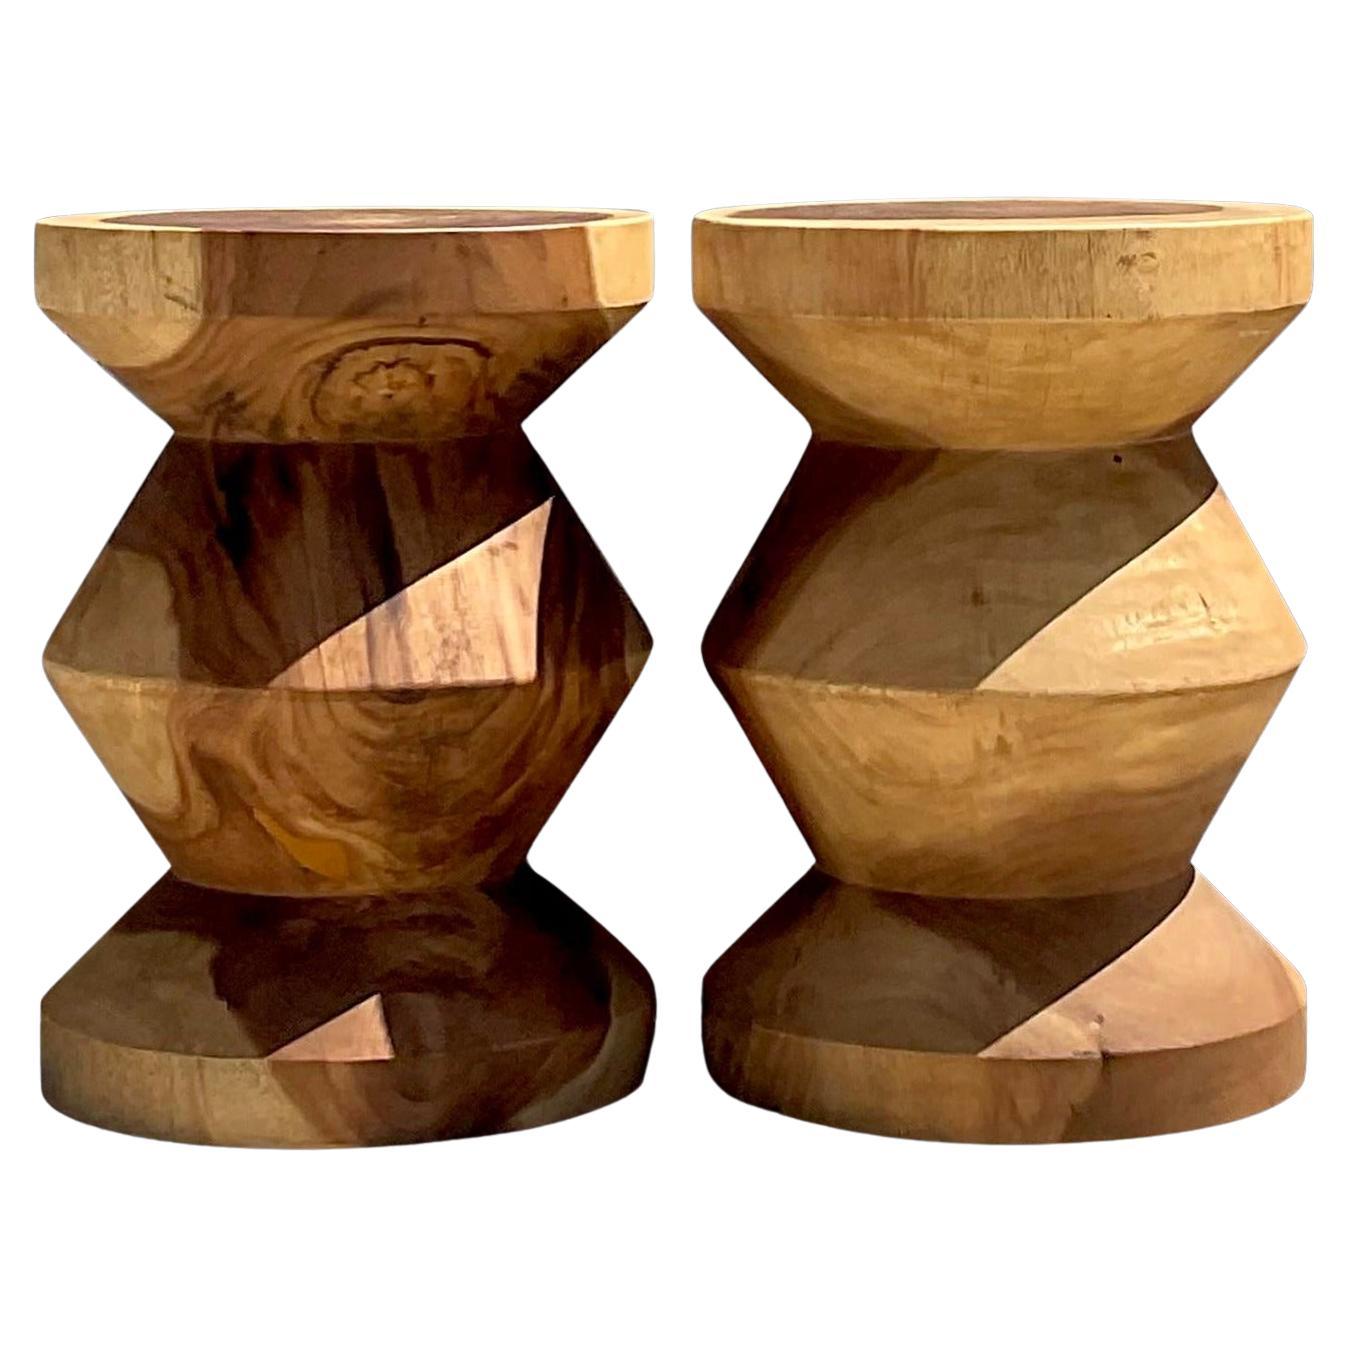 Vintage Boho Carved Stump Low Stool - a Pair For Sale